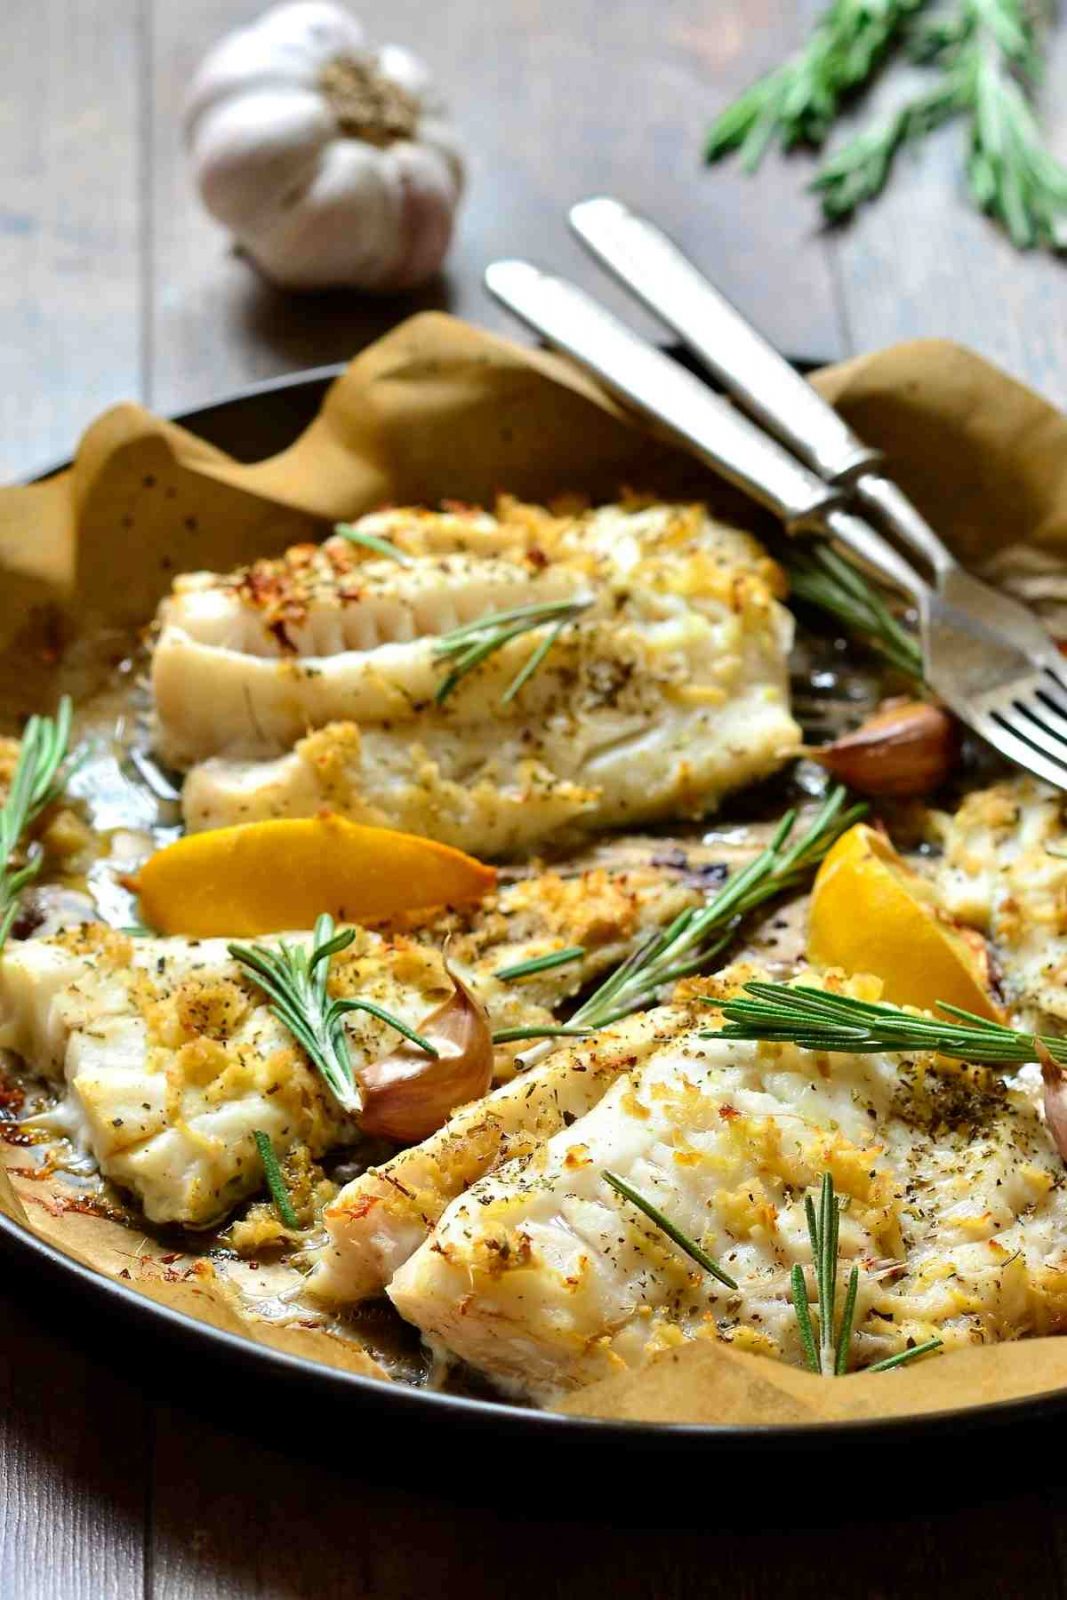 If you’re a fan of baked fish, then you’re about to fall in love with this one! Baked cod is an easy to make dish that will fall off your fork and melt right in your mouth.